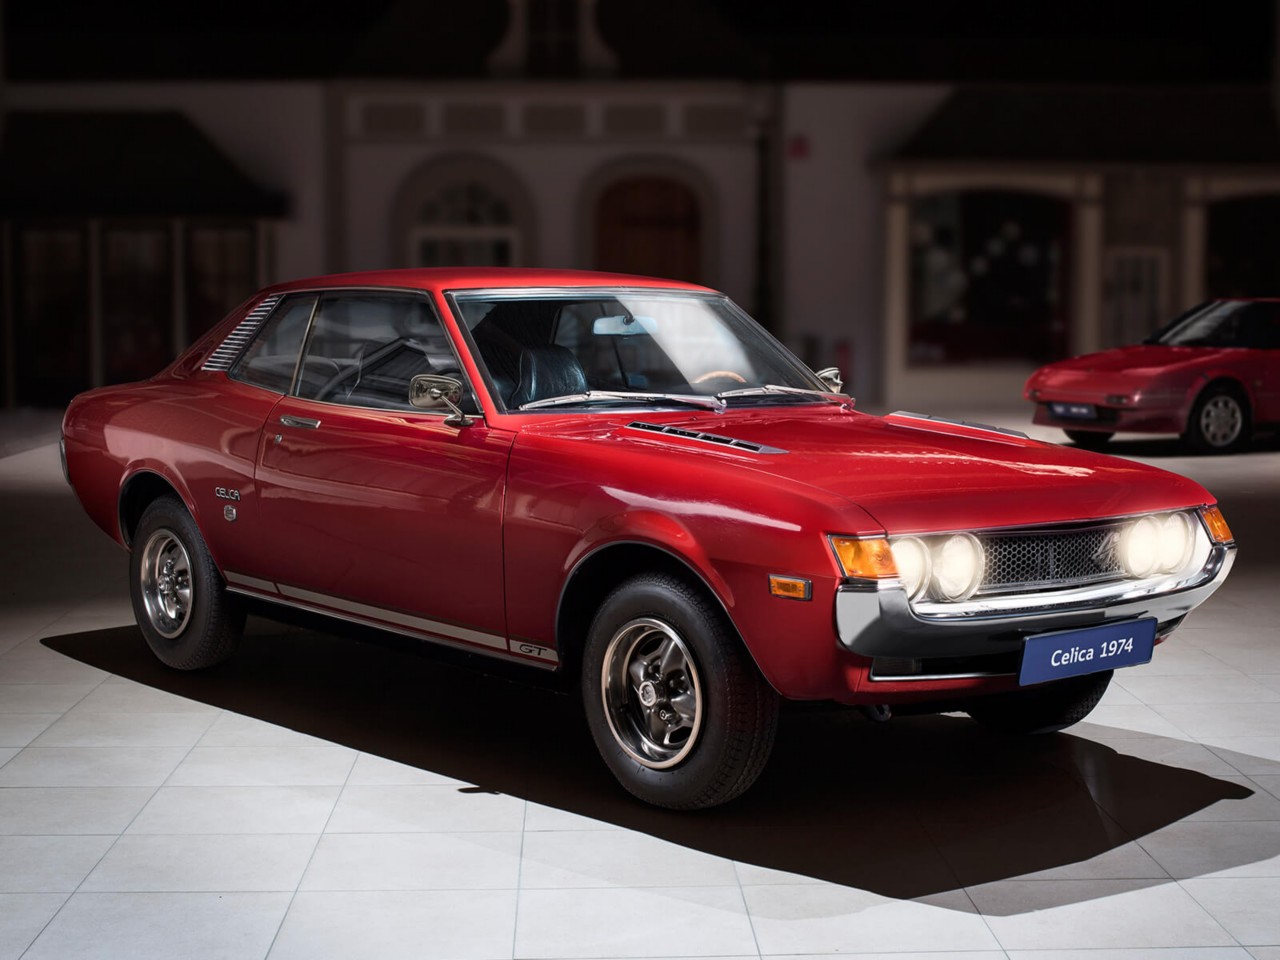 angled view of Toyota Celica 1974